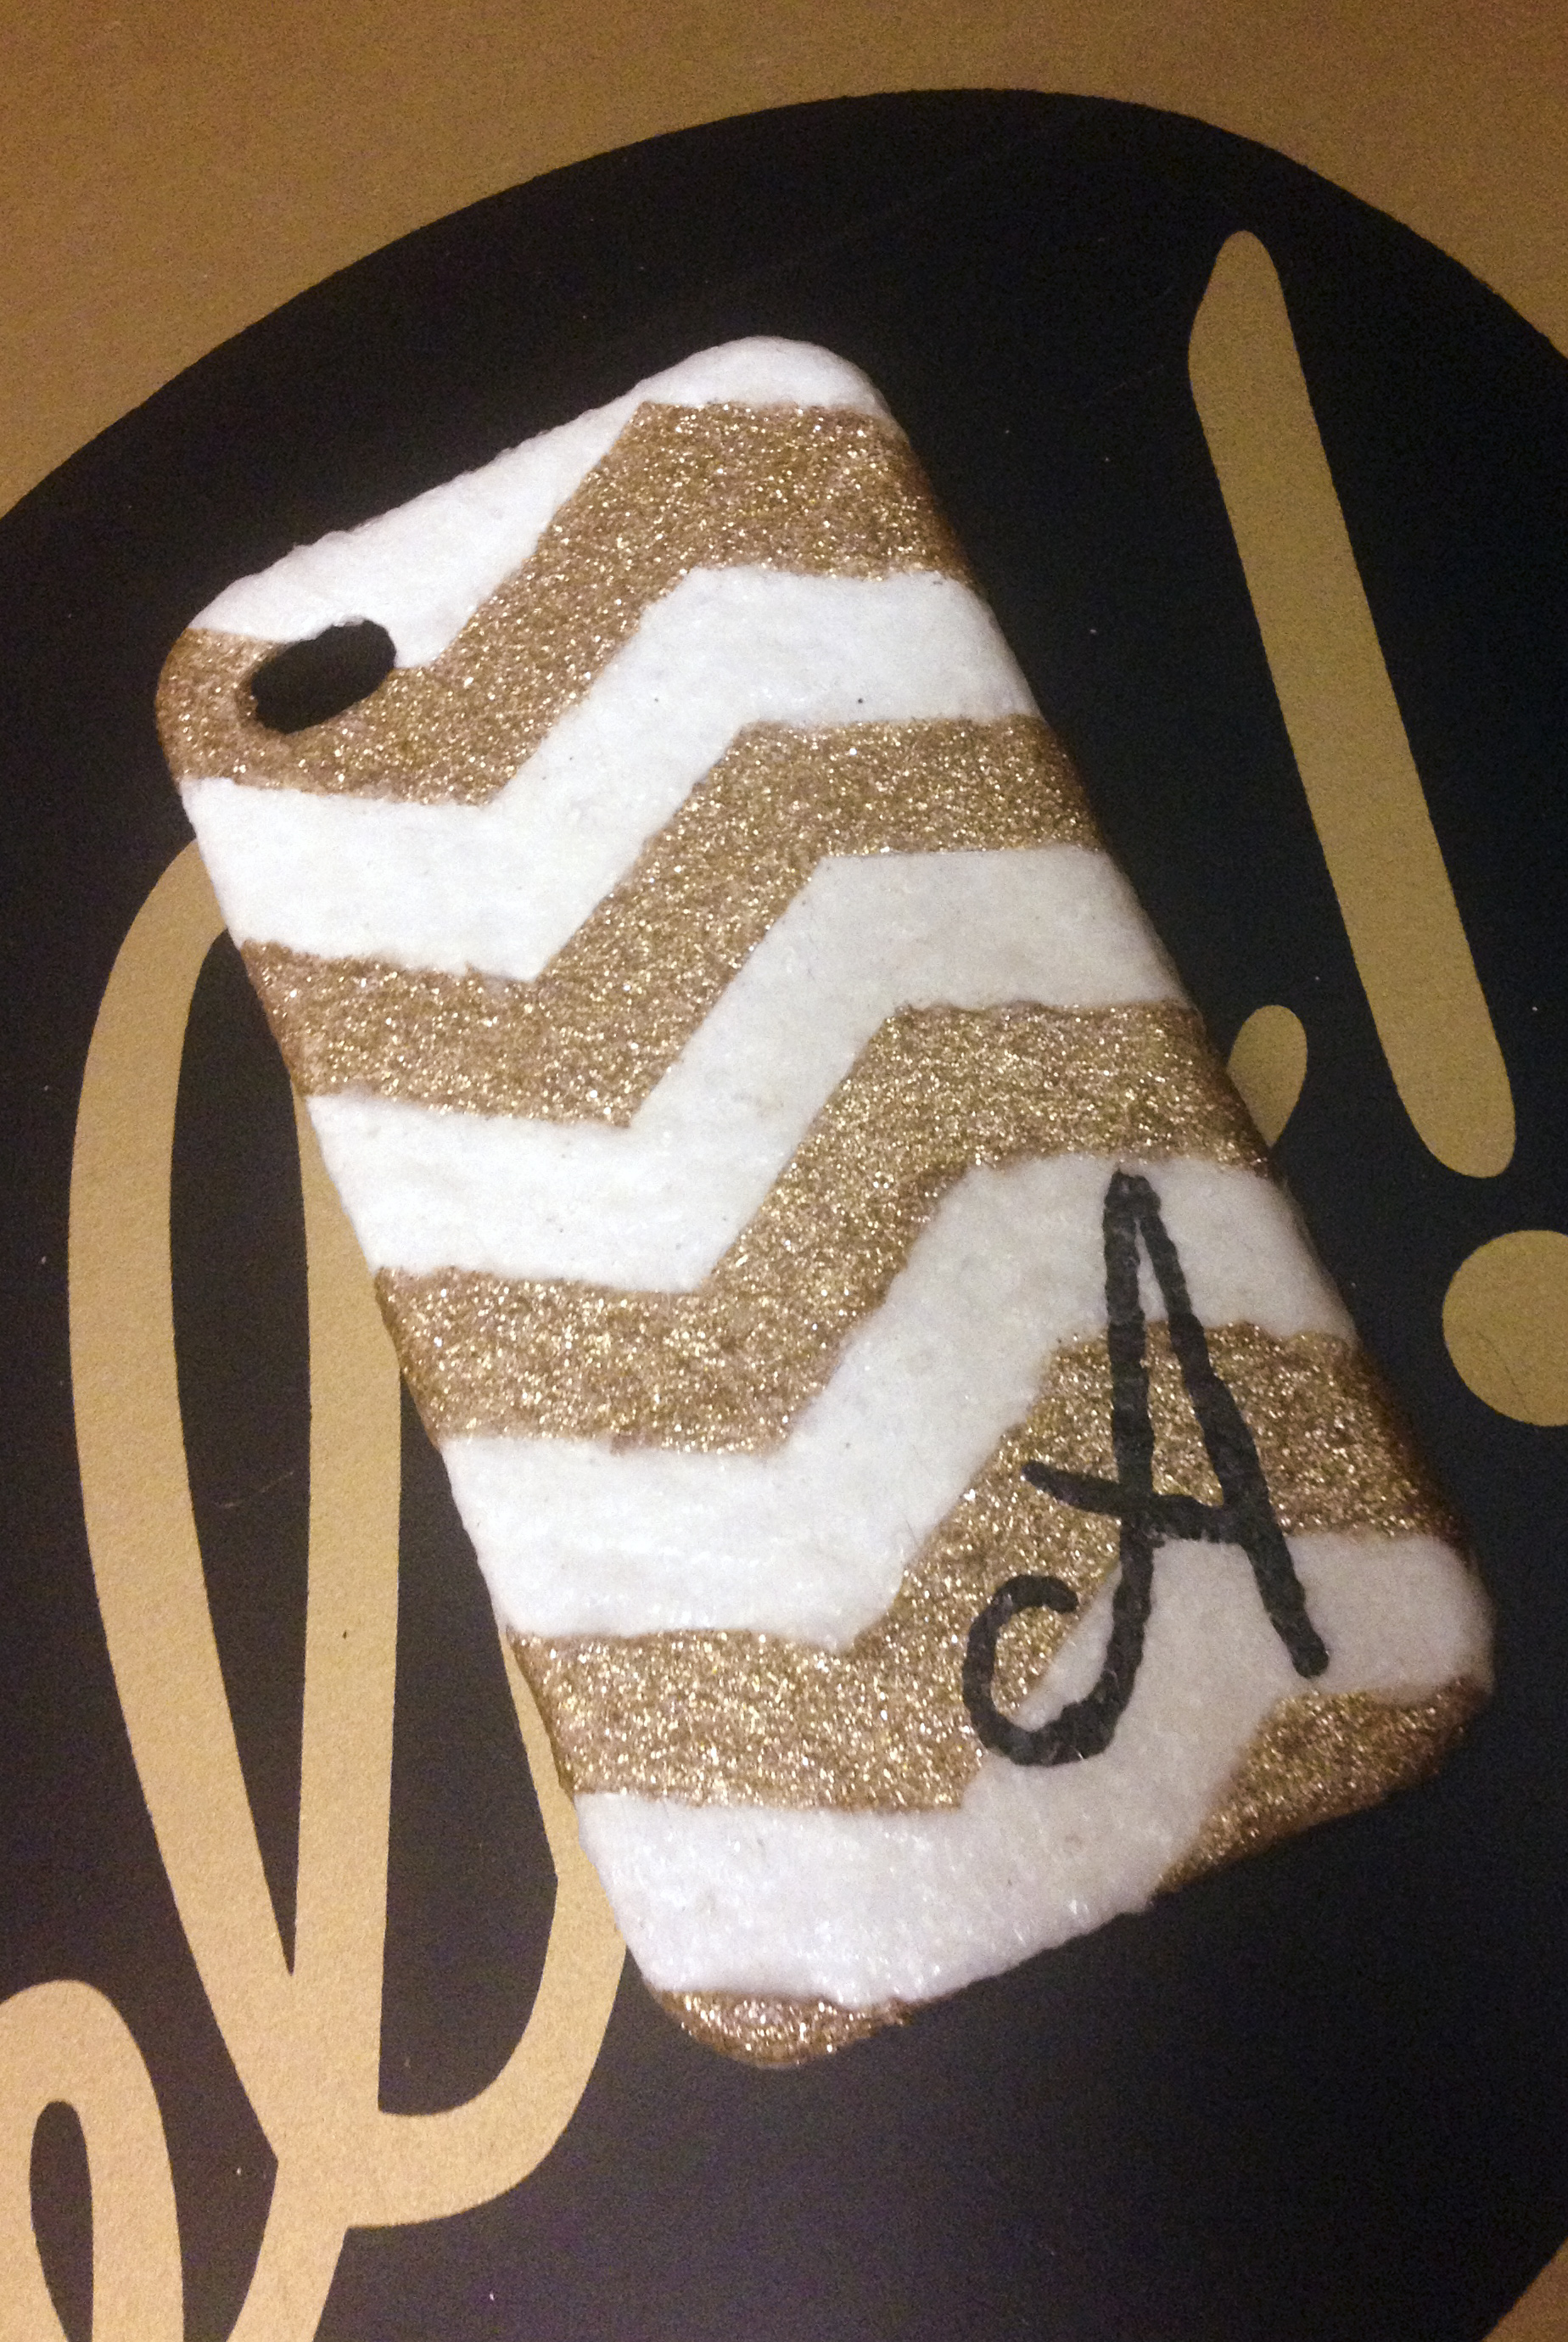 phone case makeover - the finished product!